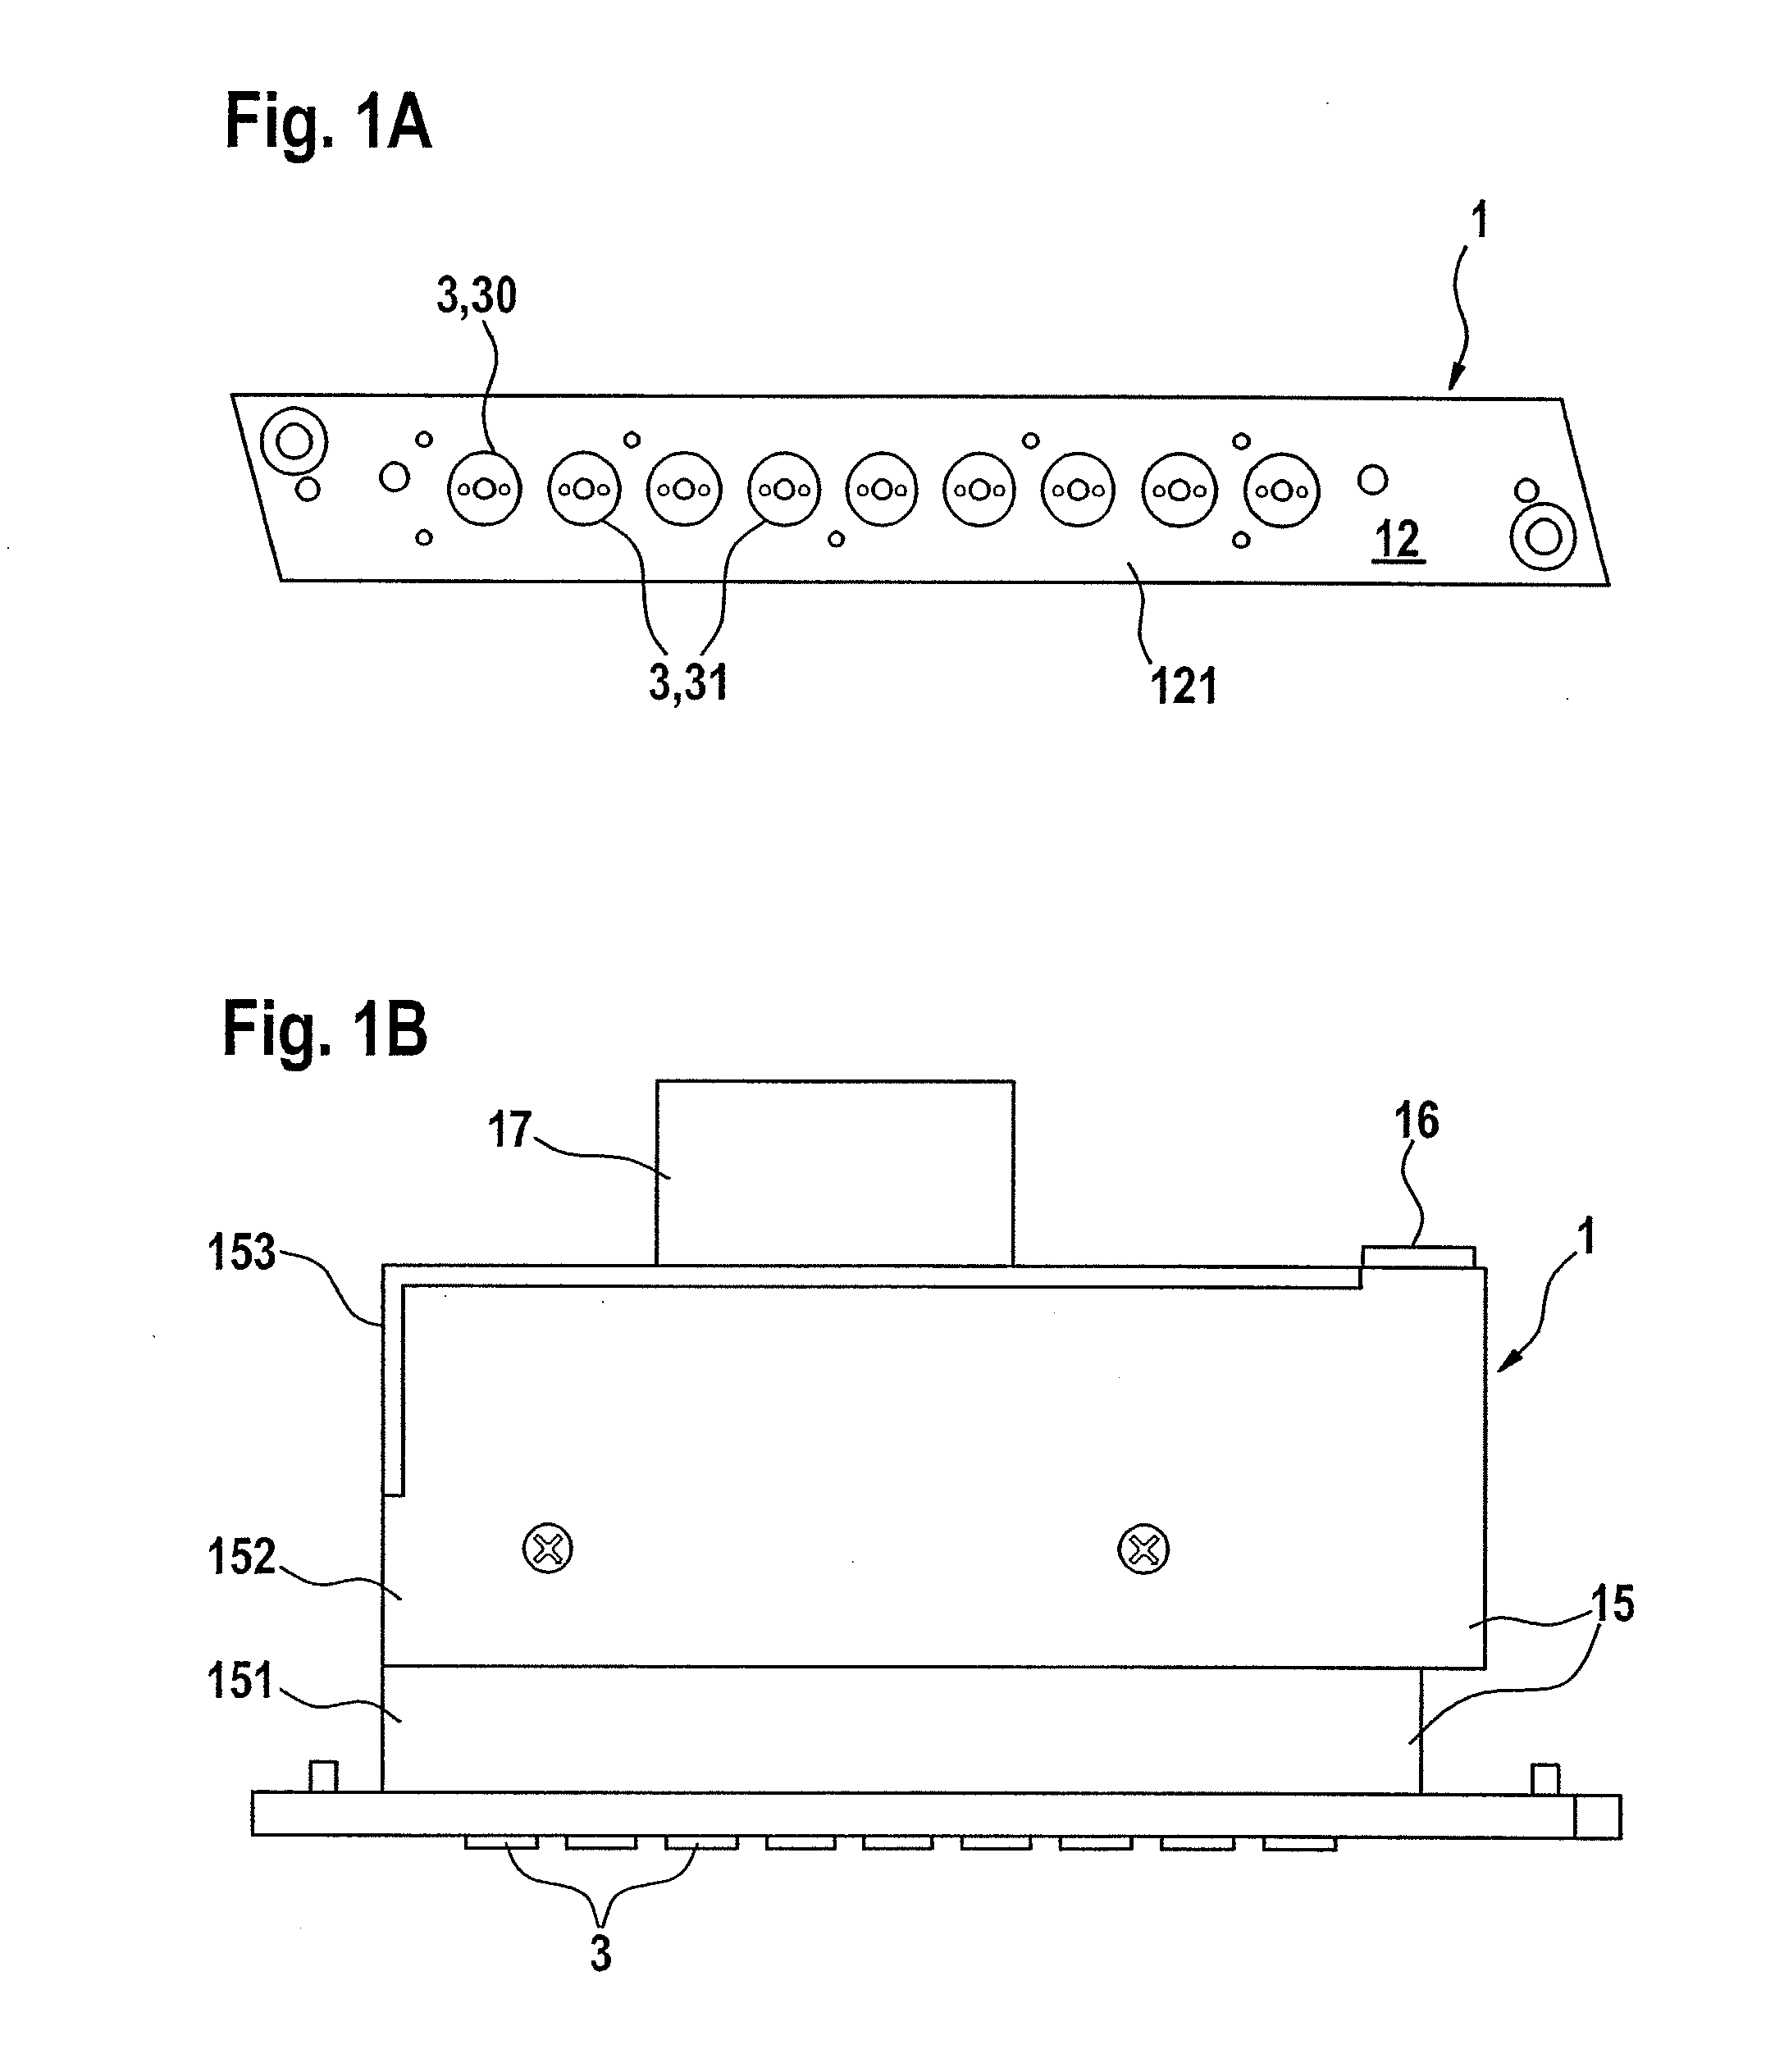 Applicator for applying fluid to a substrate, comprising valve mechanisms, method for cleaning said applicator, and valve mechanisms for said applicator